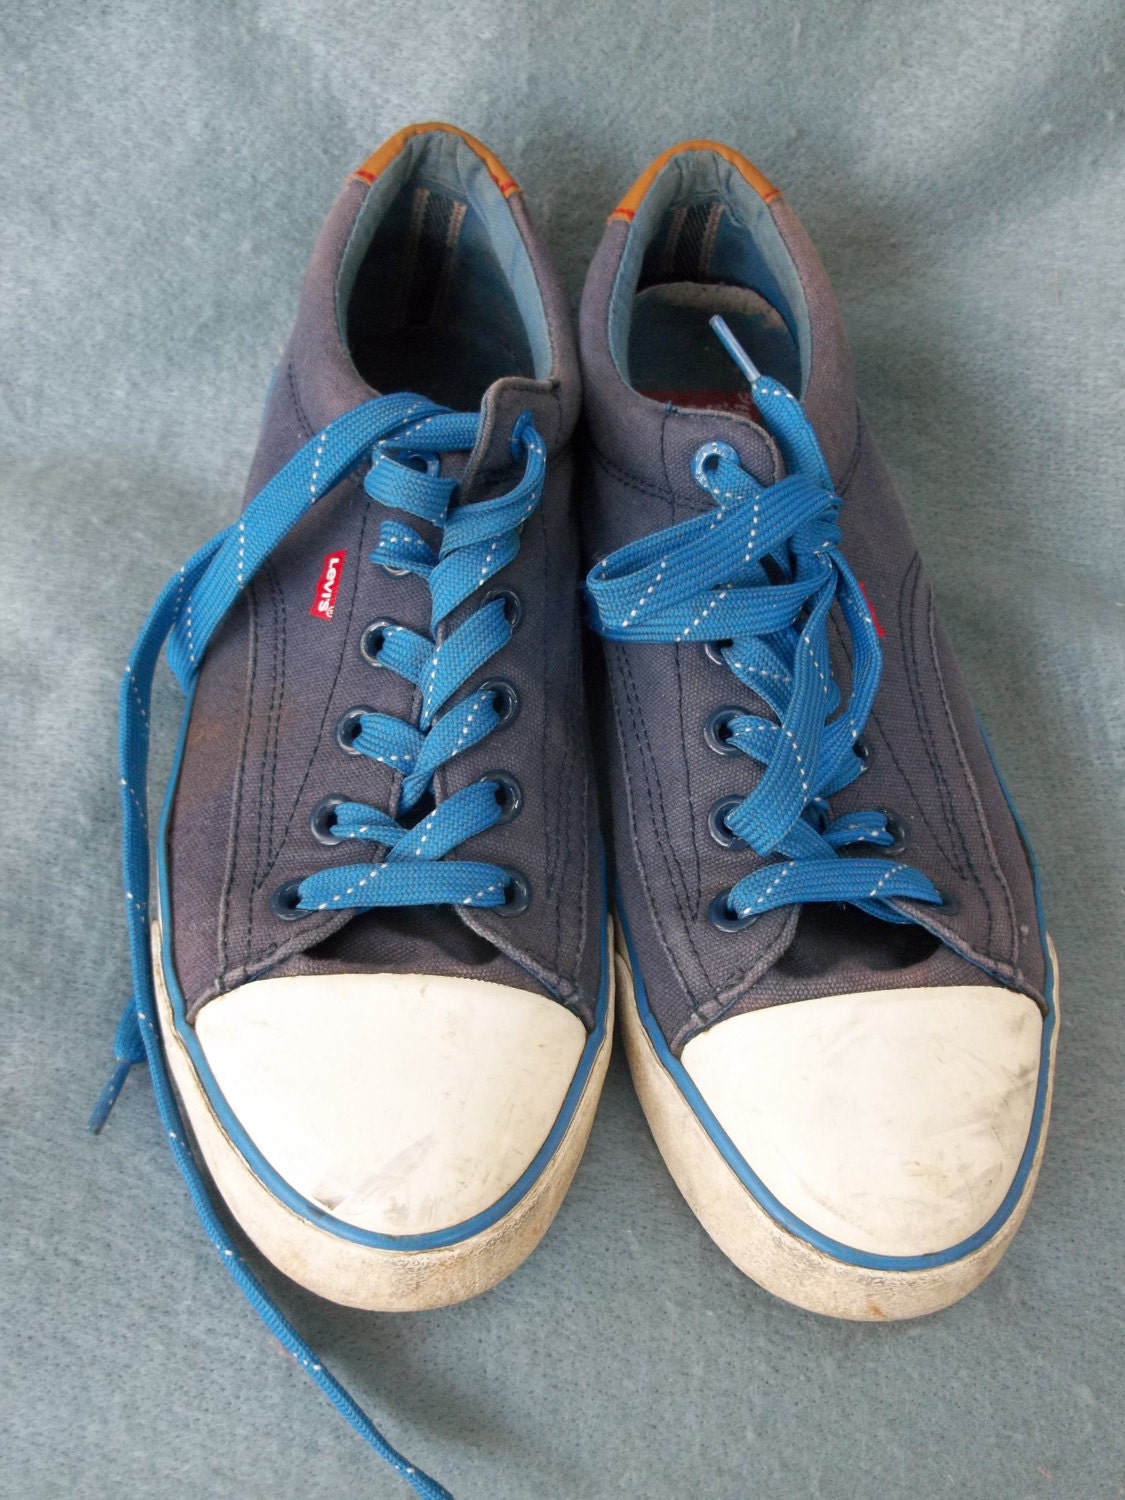 Levis Shoes Tennis Shoes jean/ canvas and rubber by HillBillyPOP